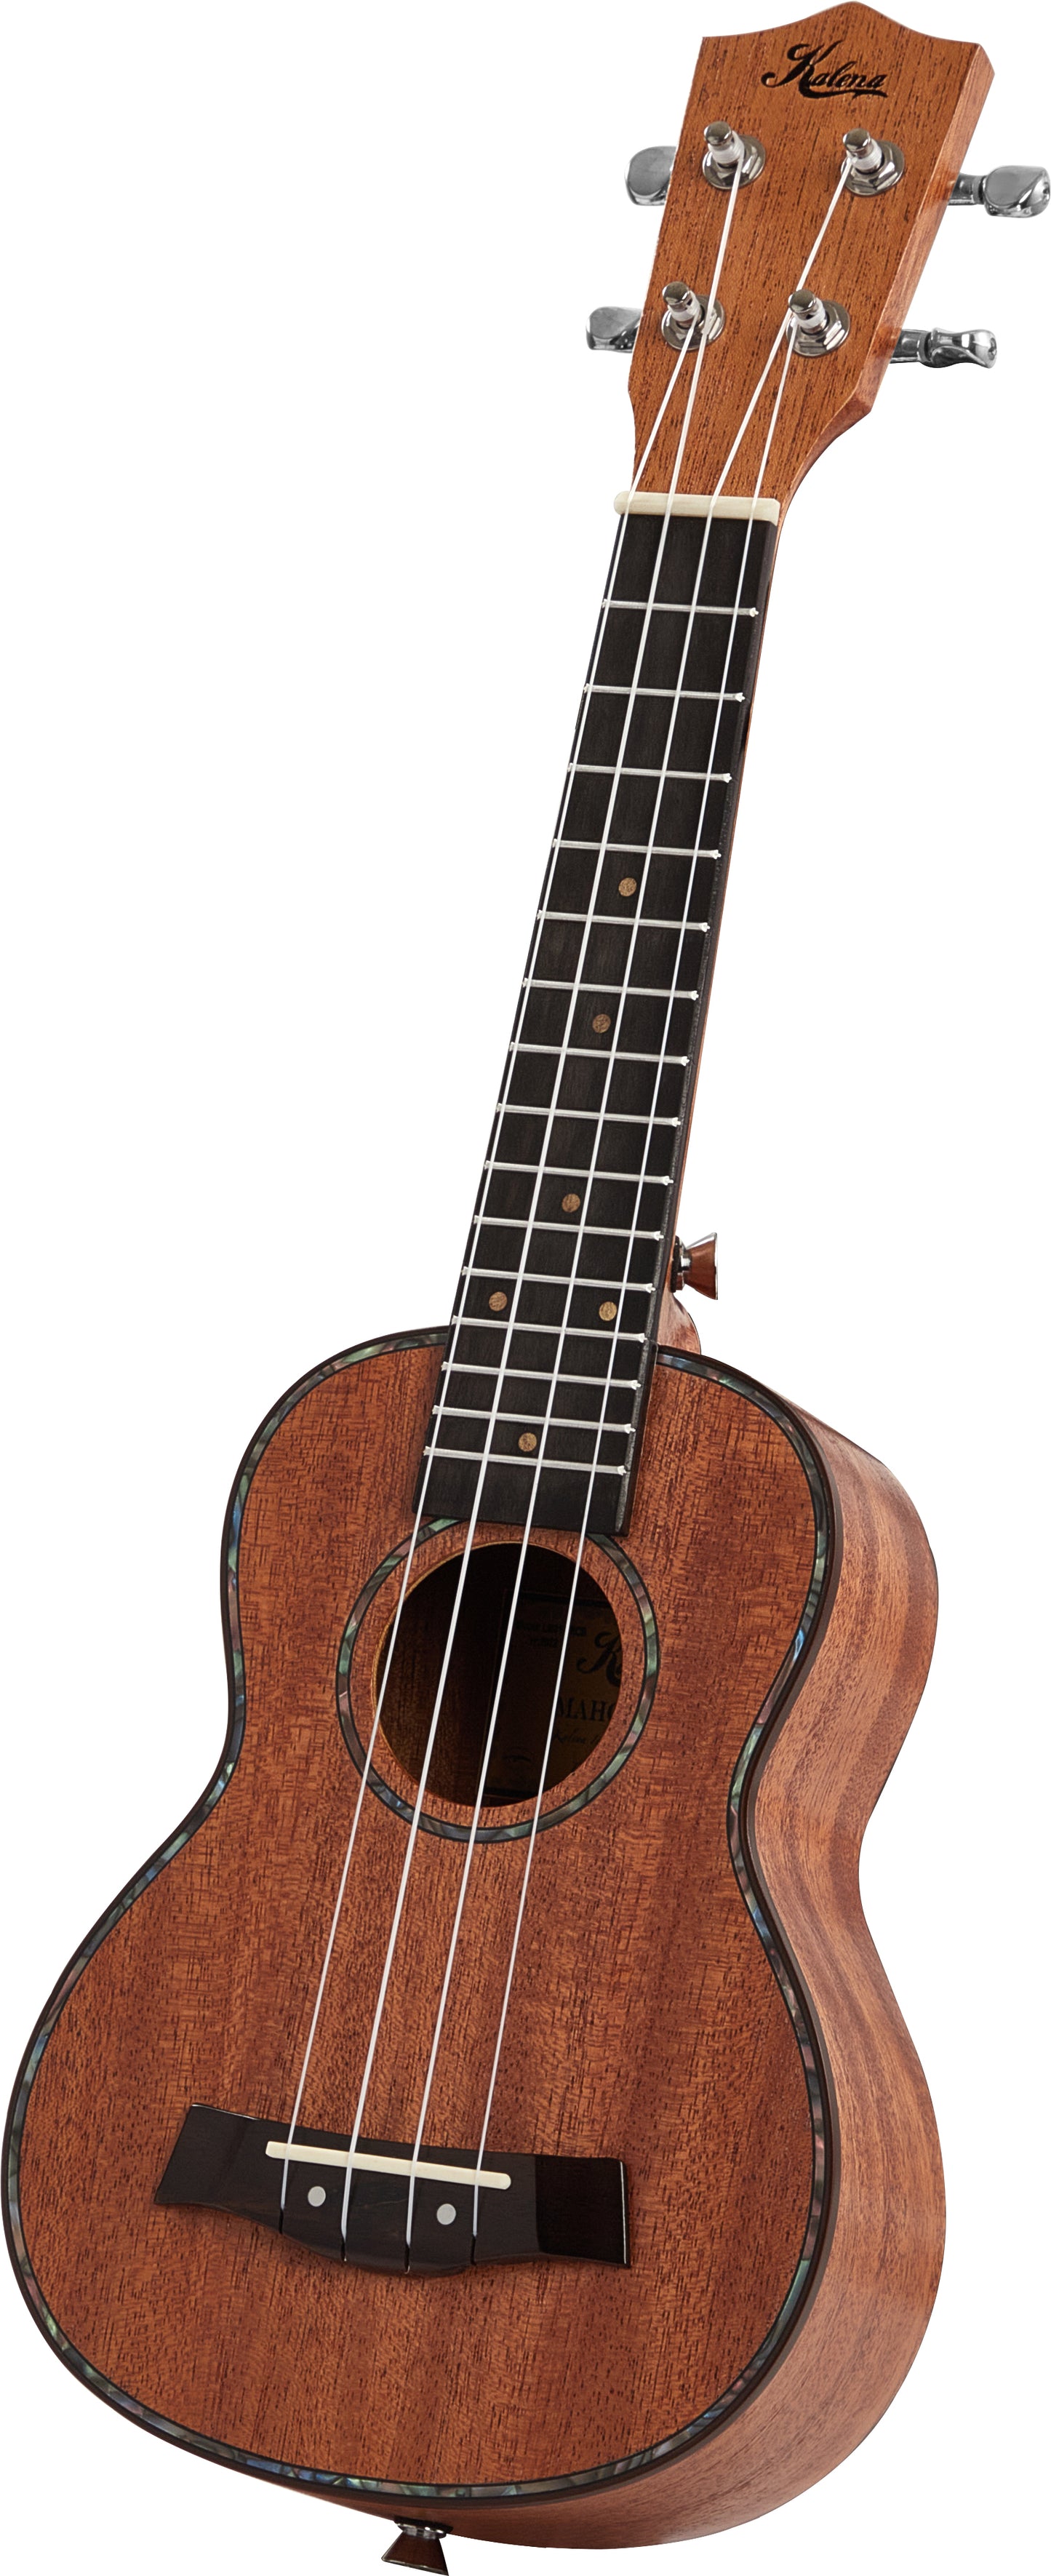 Kalena LM series Soprano Mahogany Ukulele with Celluloid Binding Traditional complete set: Strings, Picks, Strap, Digital Tuner, Padded Case, Starter Guide